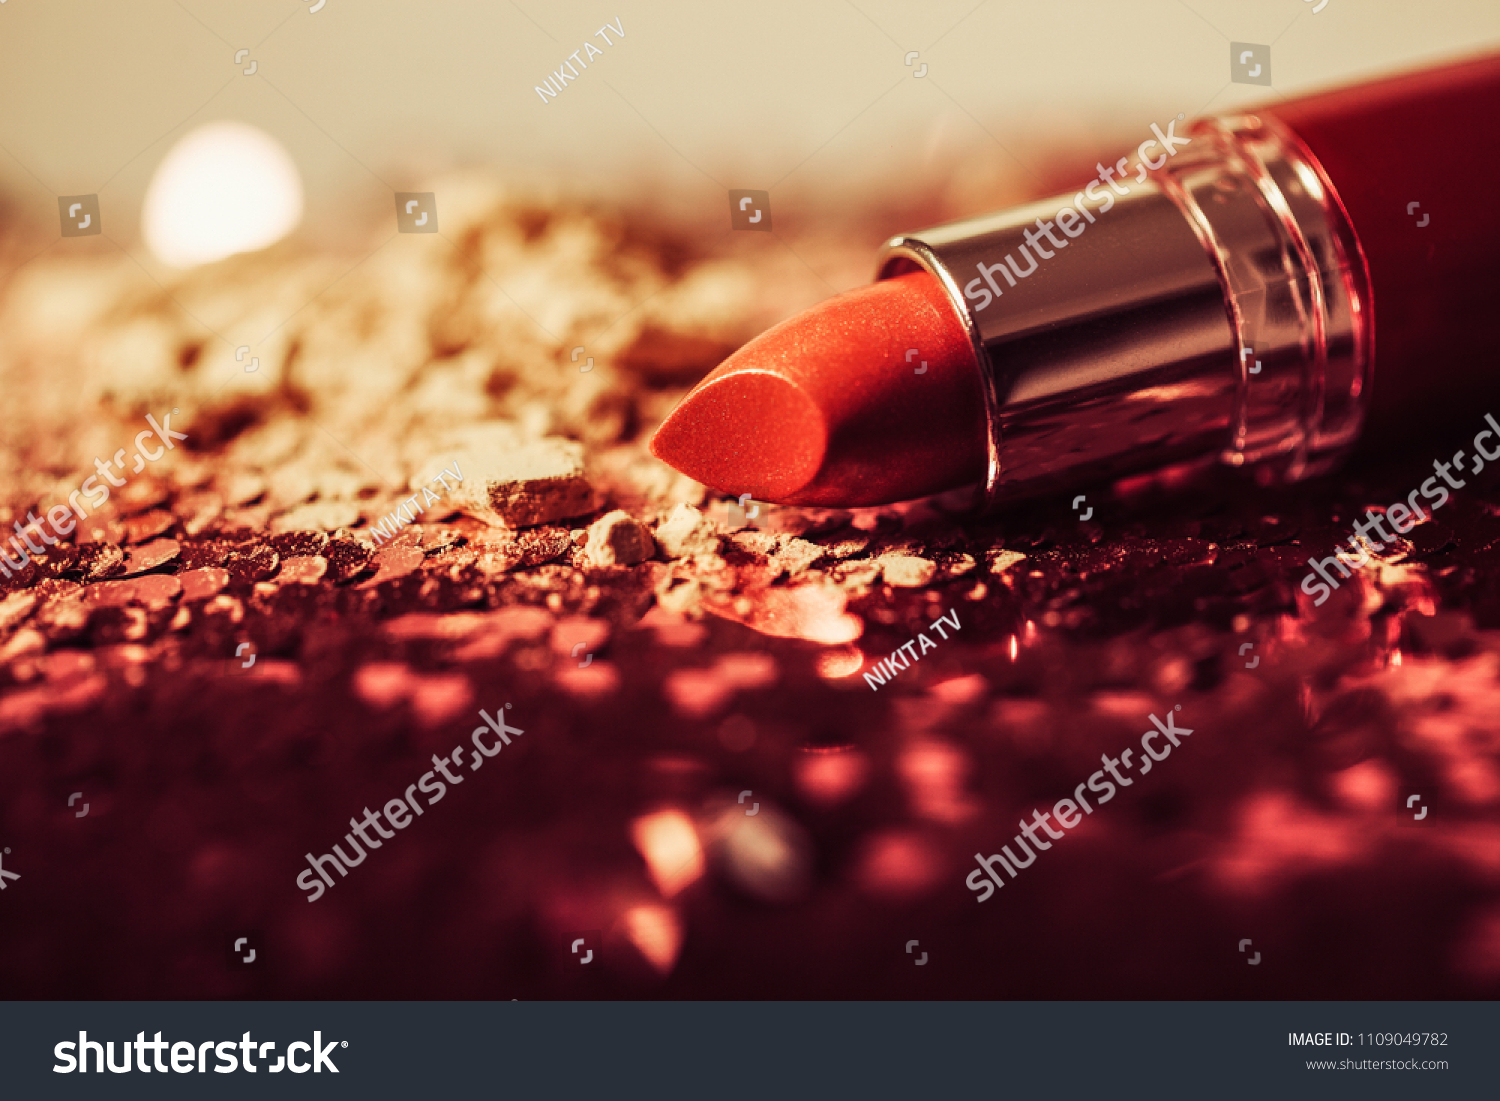 Red lipstick isolated on white background #1109049782